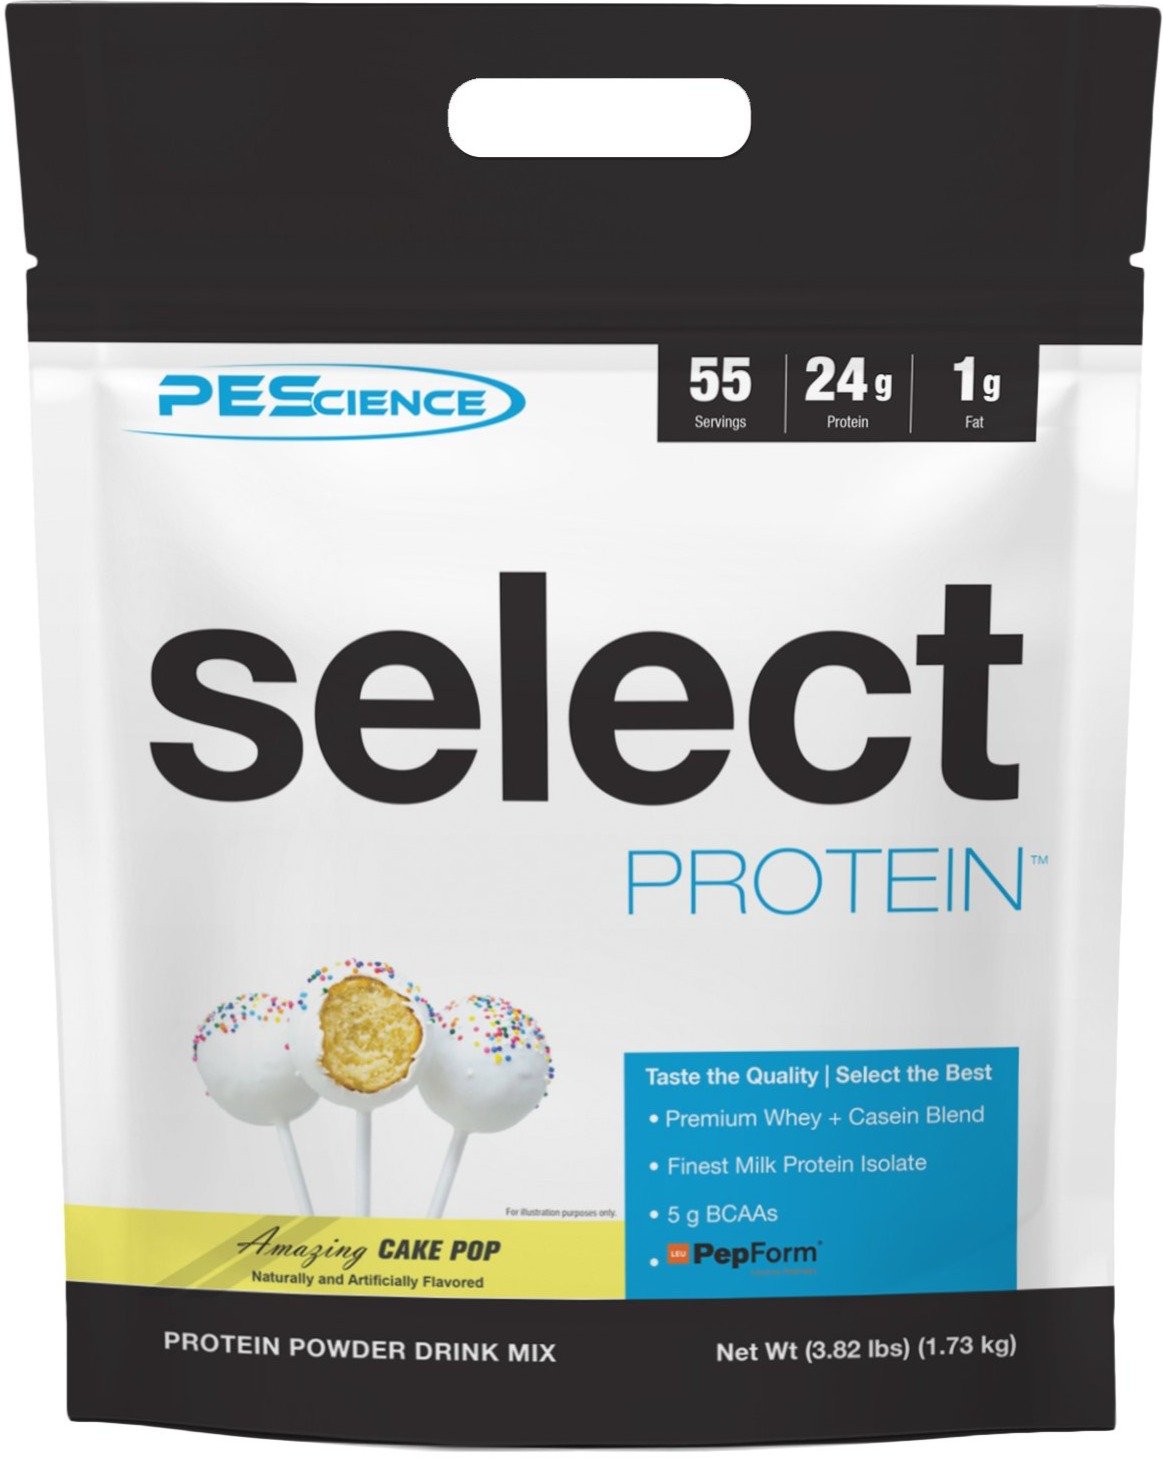 PEScience Select Protein Cake Pop, 55 Servings, SNS Health, Sports Nutrition